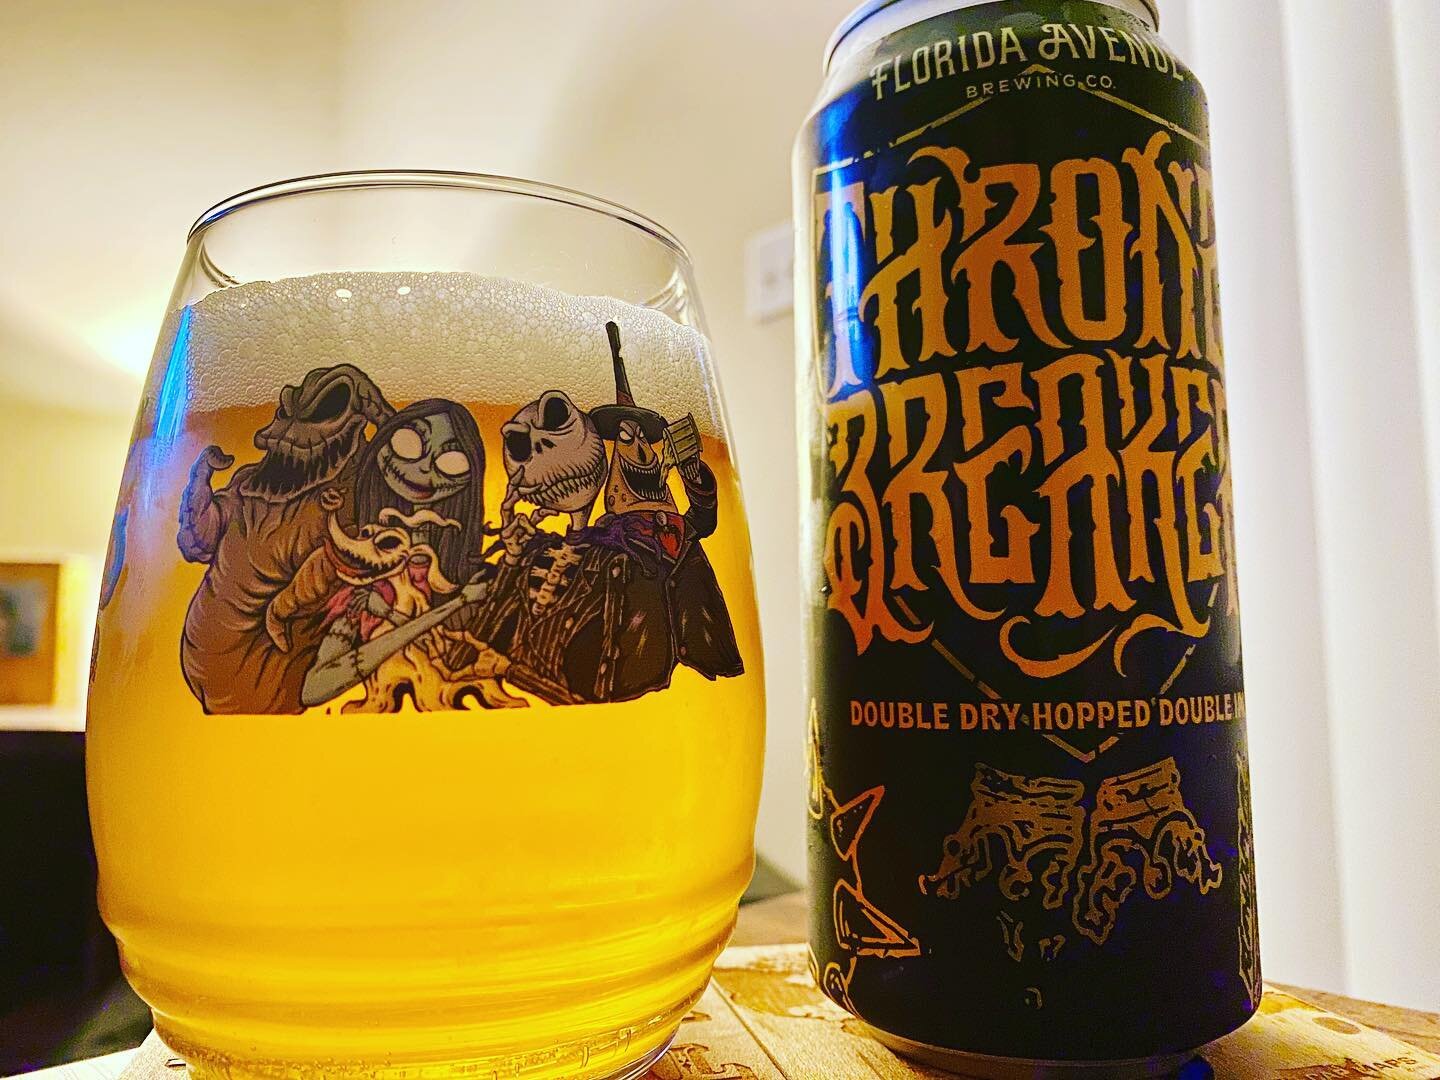 Throne Breaker from @floridaavebrewing Now that this crazy Wednesday is over, this double IPA, clocking in at 8.1% ABV is just right 👑 #dipa #podcastersofinstagram #craft #craftbeer #tapthecraft #beer #ipa